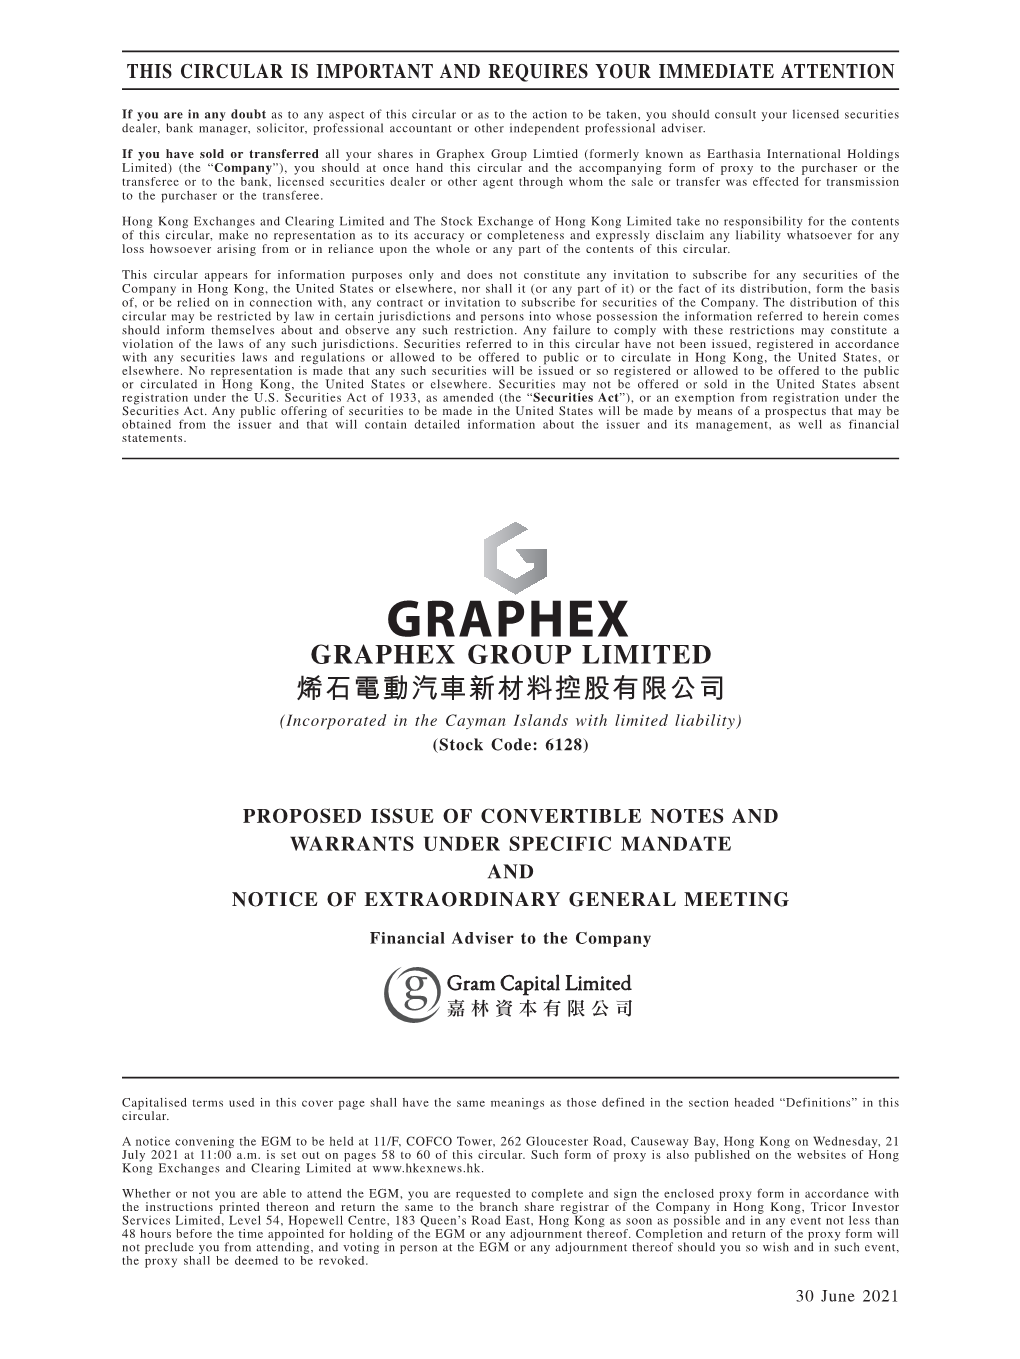 GRAPHEX GROUP LIMITED 烯石電動汽車新材料控股有限公司 (Incorporated in the Cayman Islands with Limited Liability) (Stock Code: 6128)